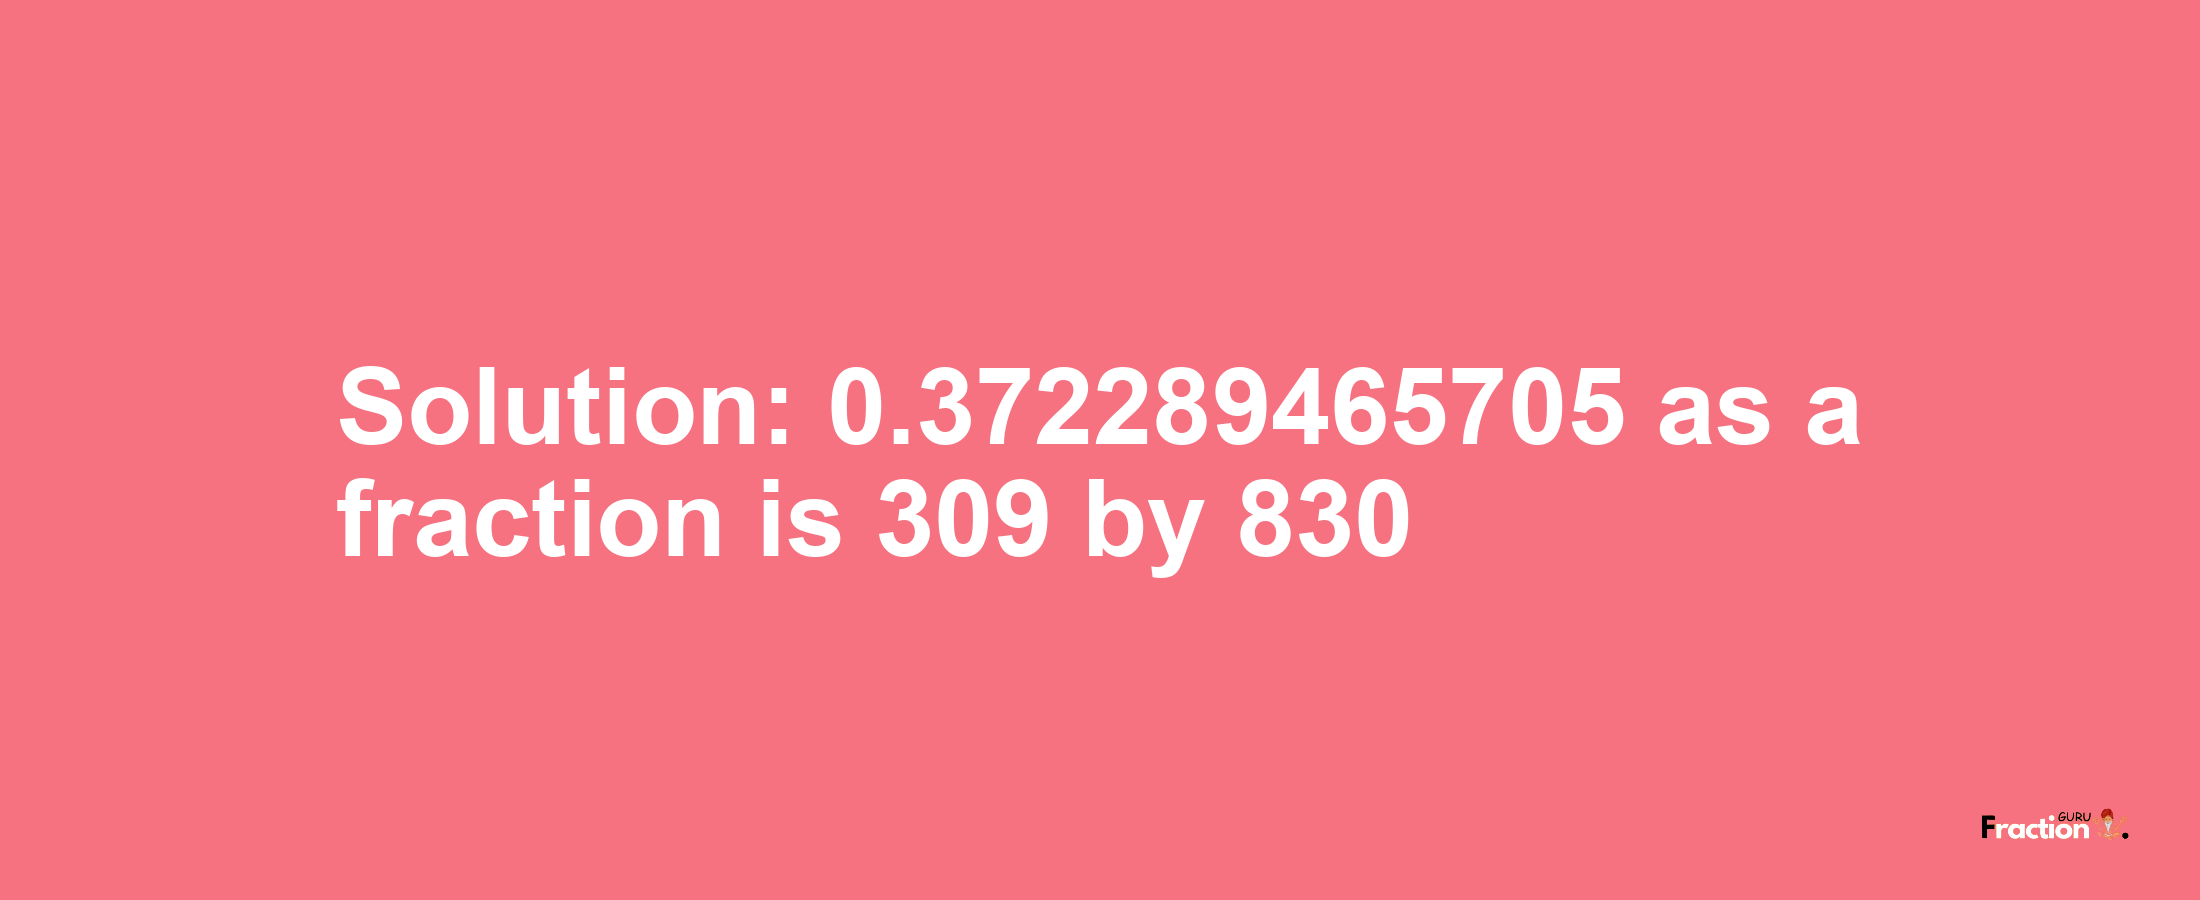 Solution:0.372289465705 as a fraction is 309/830